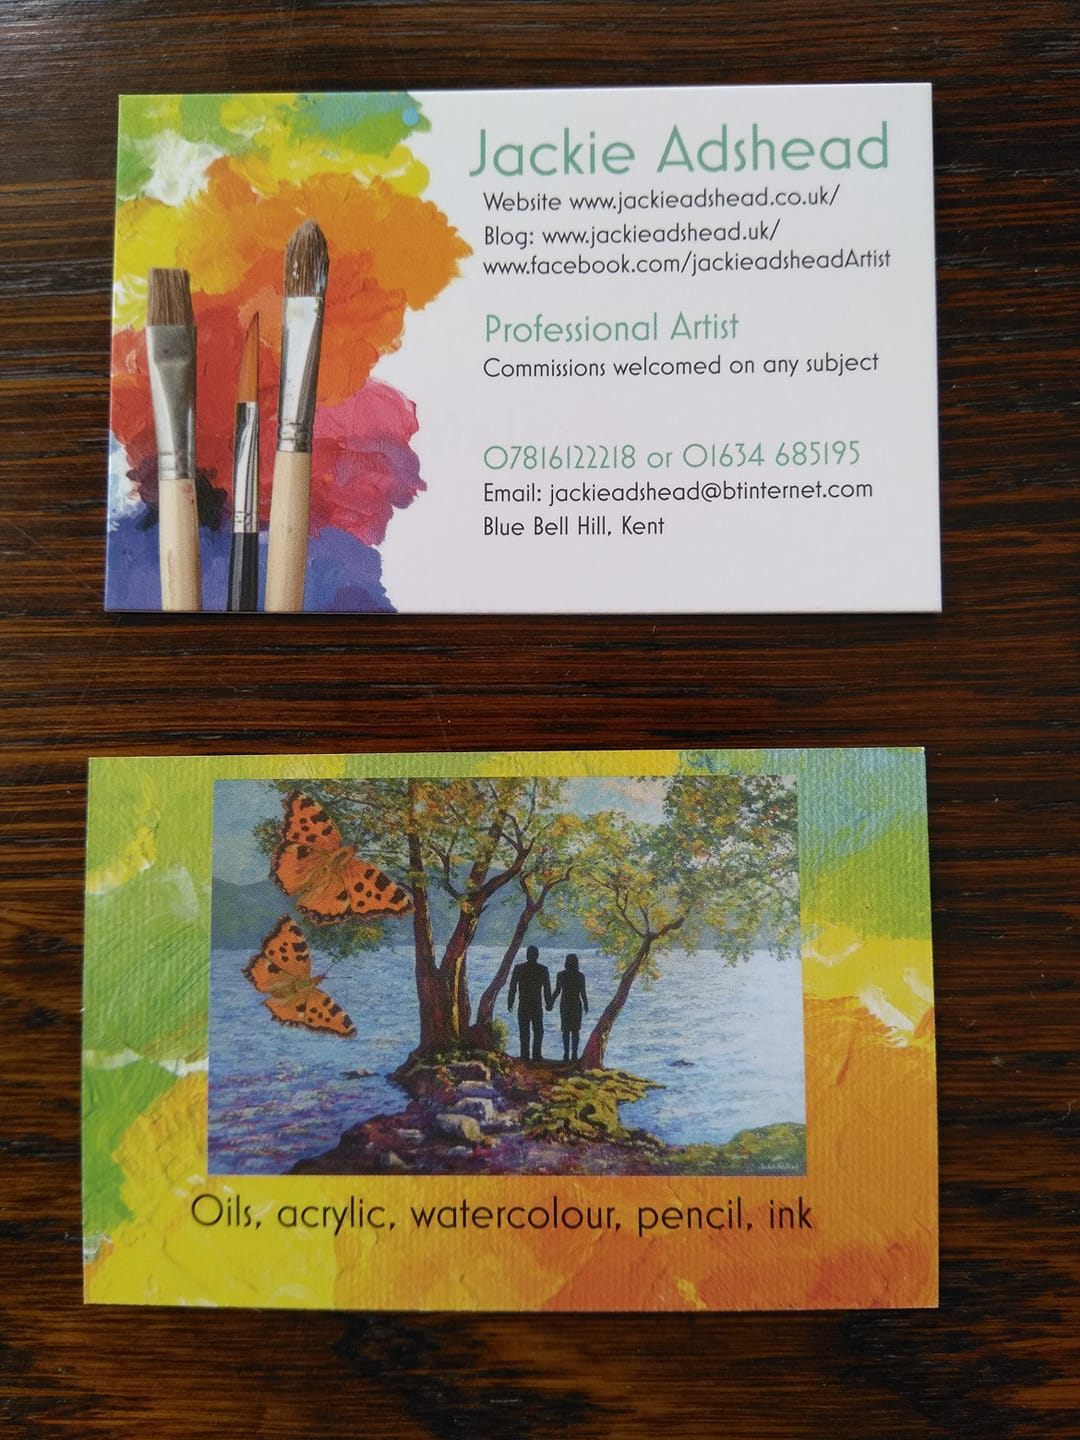 New business cards have arrived!